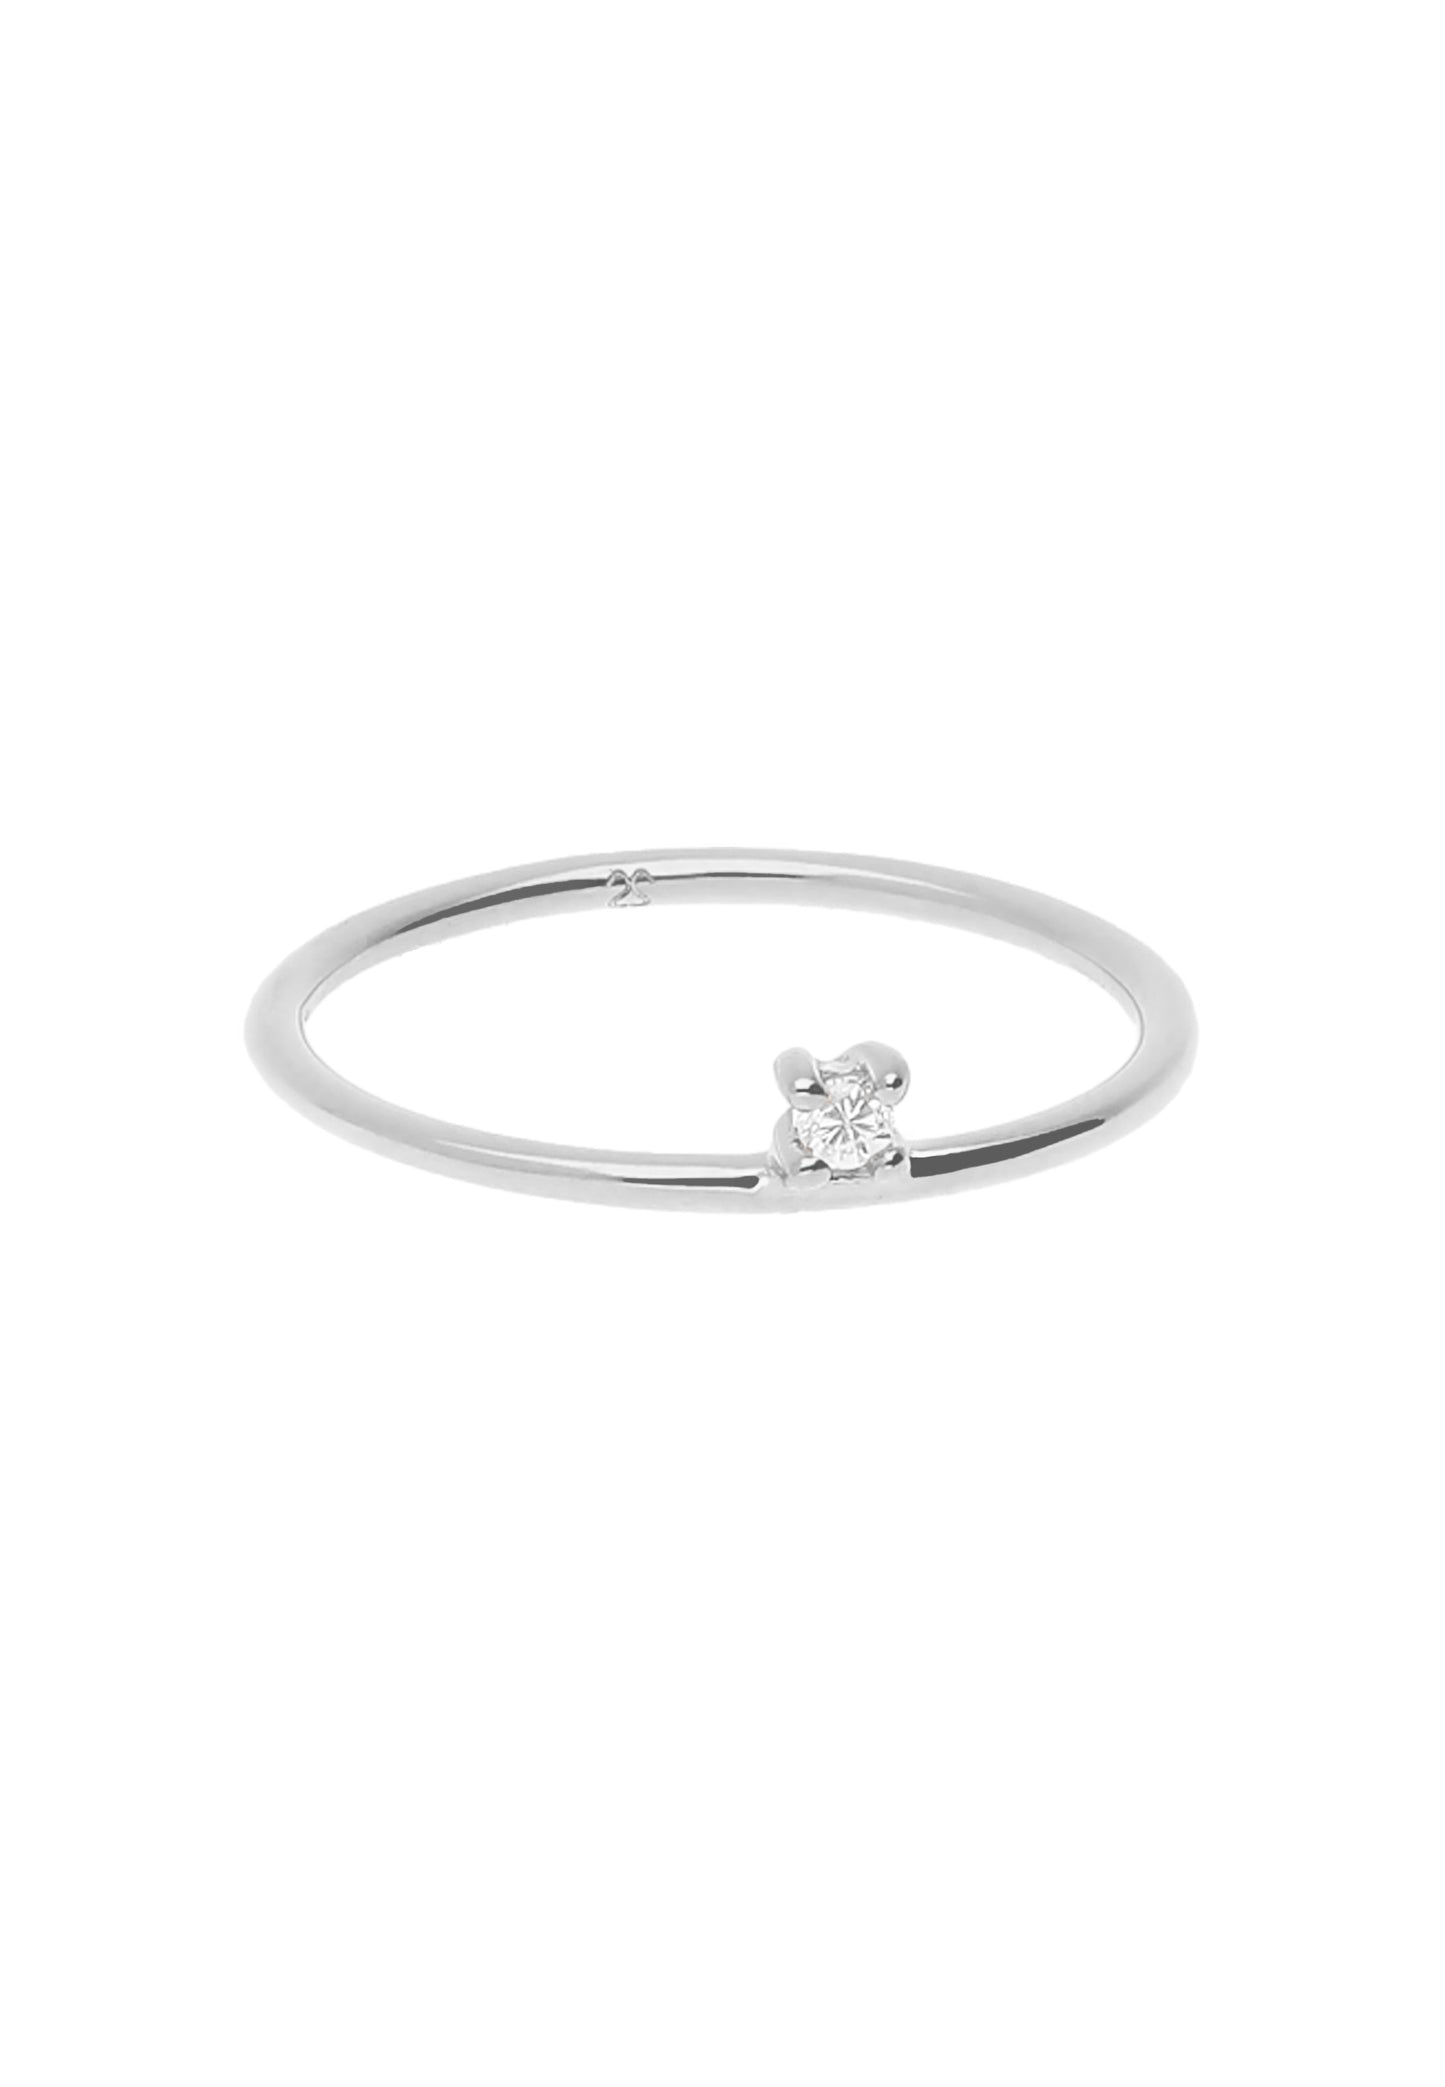 BAGUE CASSIOPEIA OR BLANC